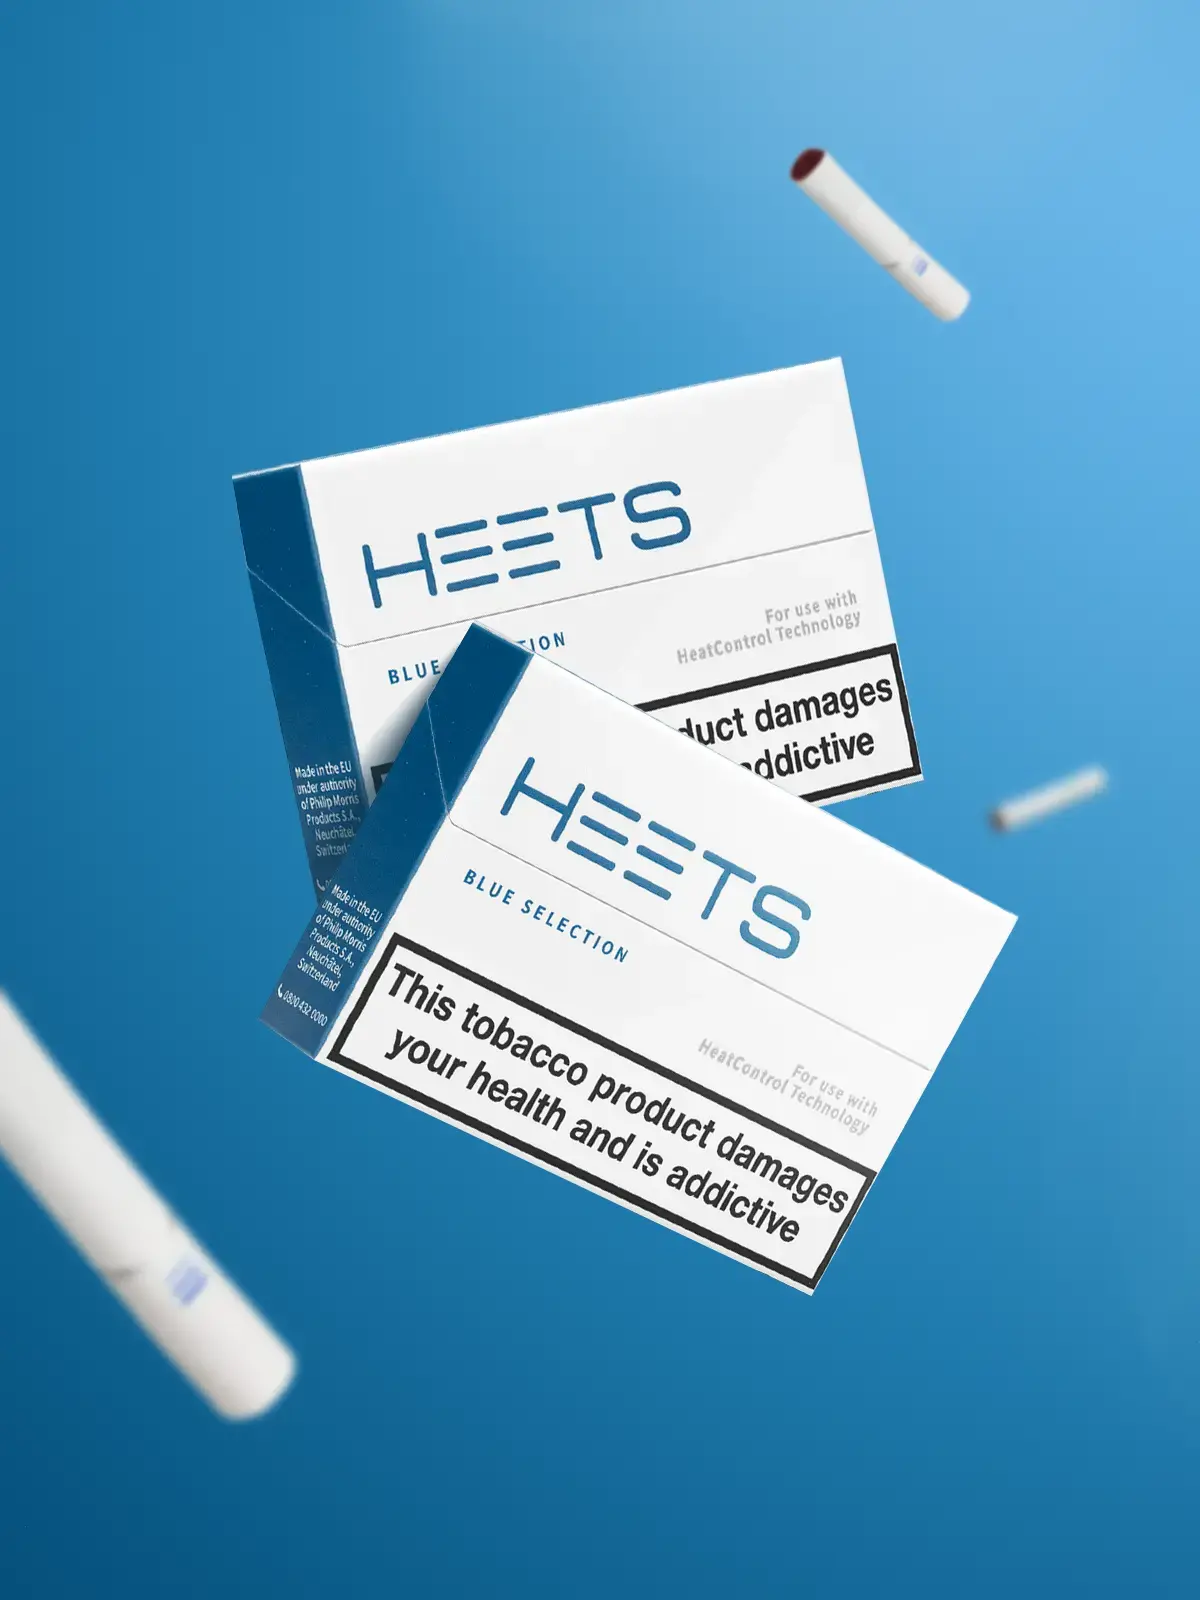 Two packs of IQOS HEETS Blue along with some loose HEETS Sticks floating in front of a blue background